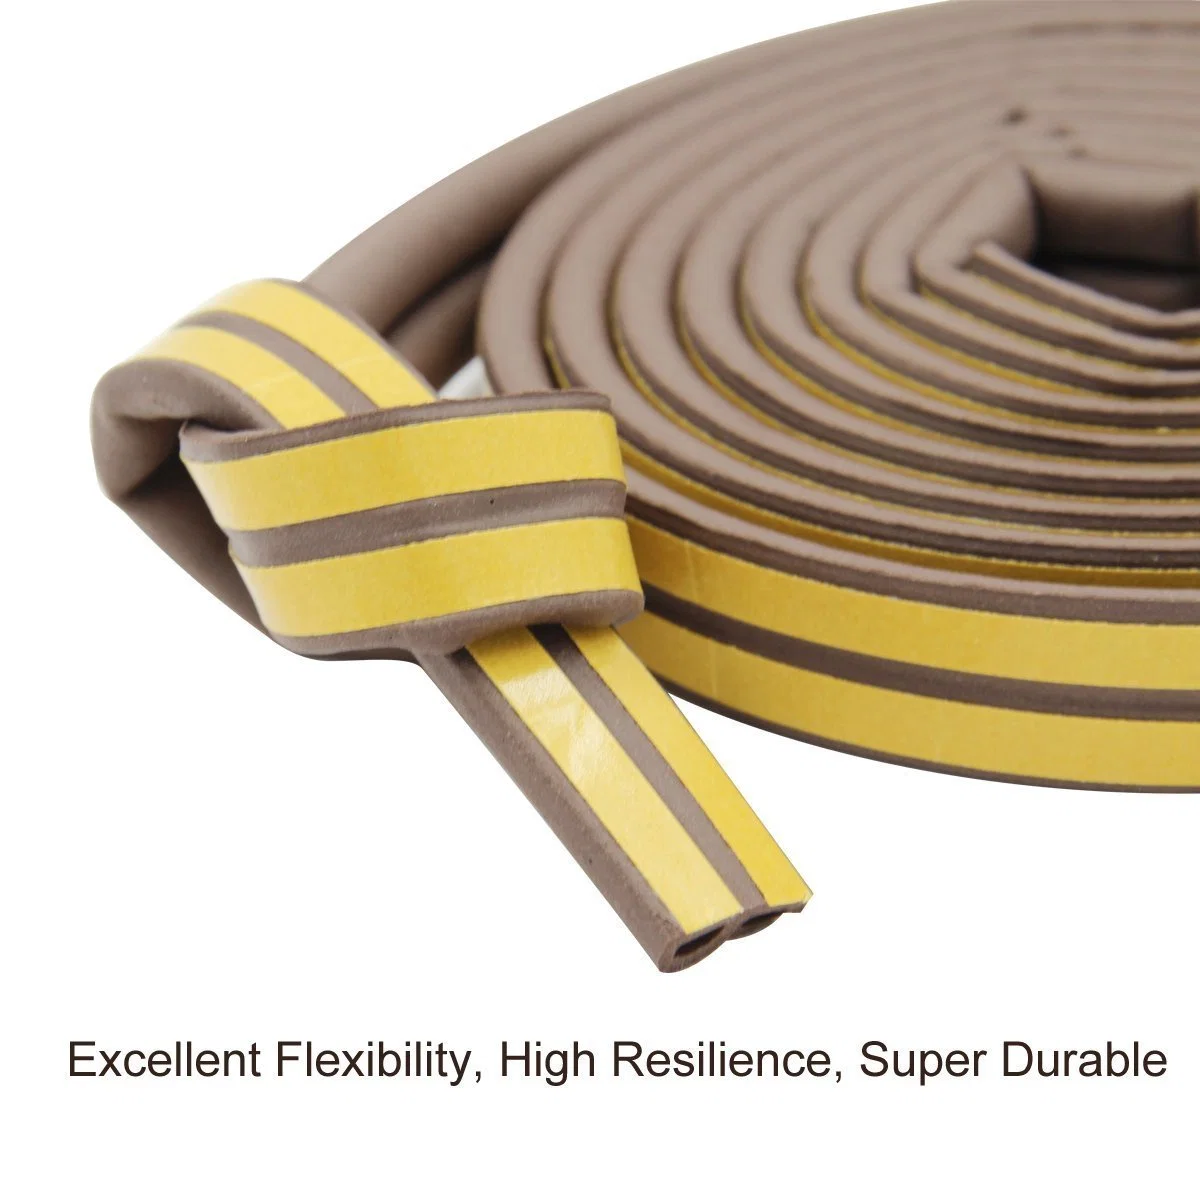 3m EPDM Rubber Door Gasket D E I P Shape Self-Adhesive Backed Tape Foam Seal Strip for Wooden Door Seal Weather Strip